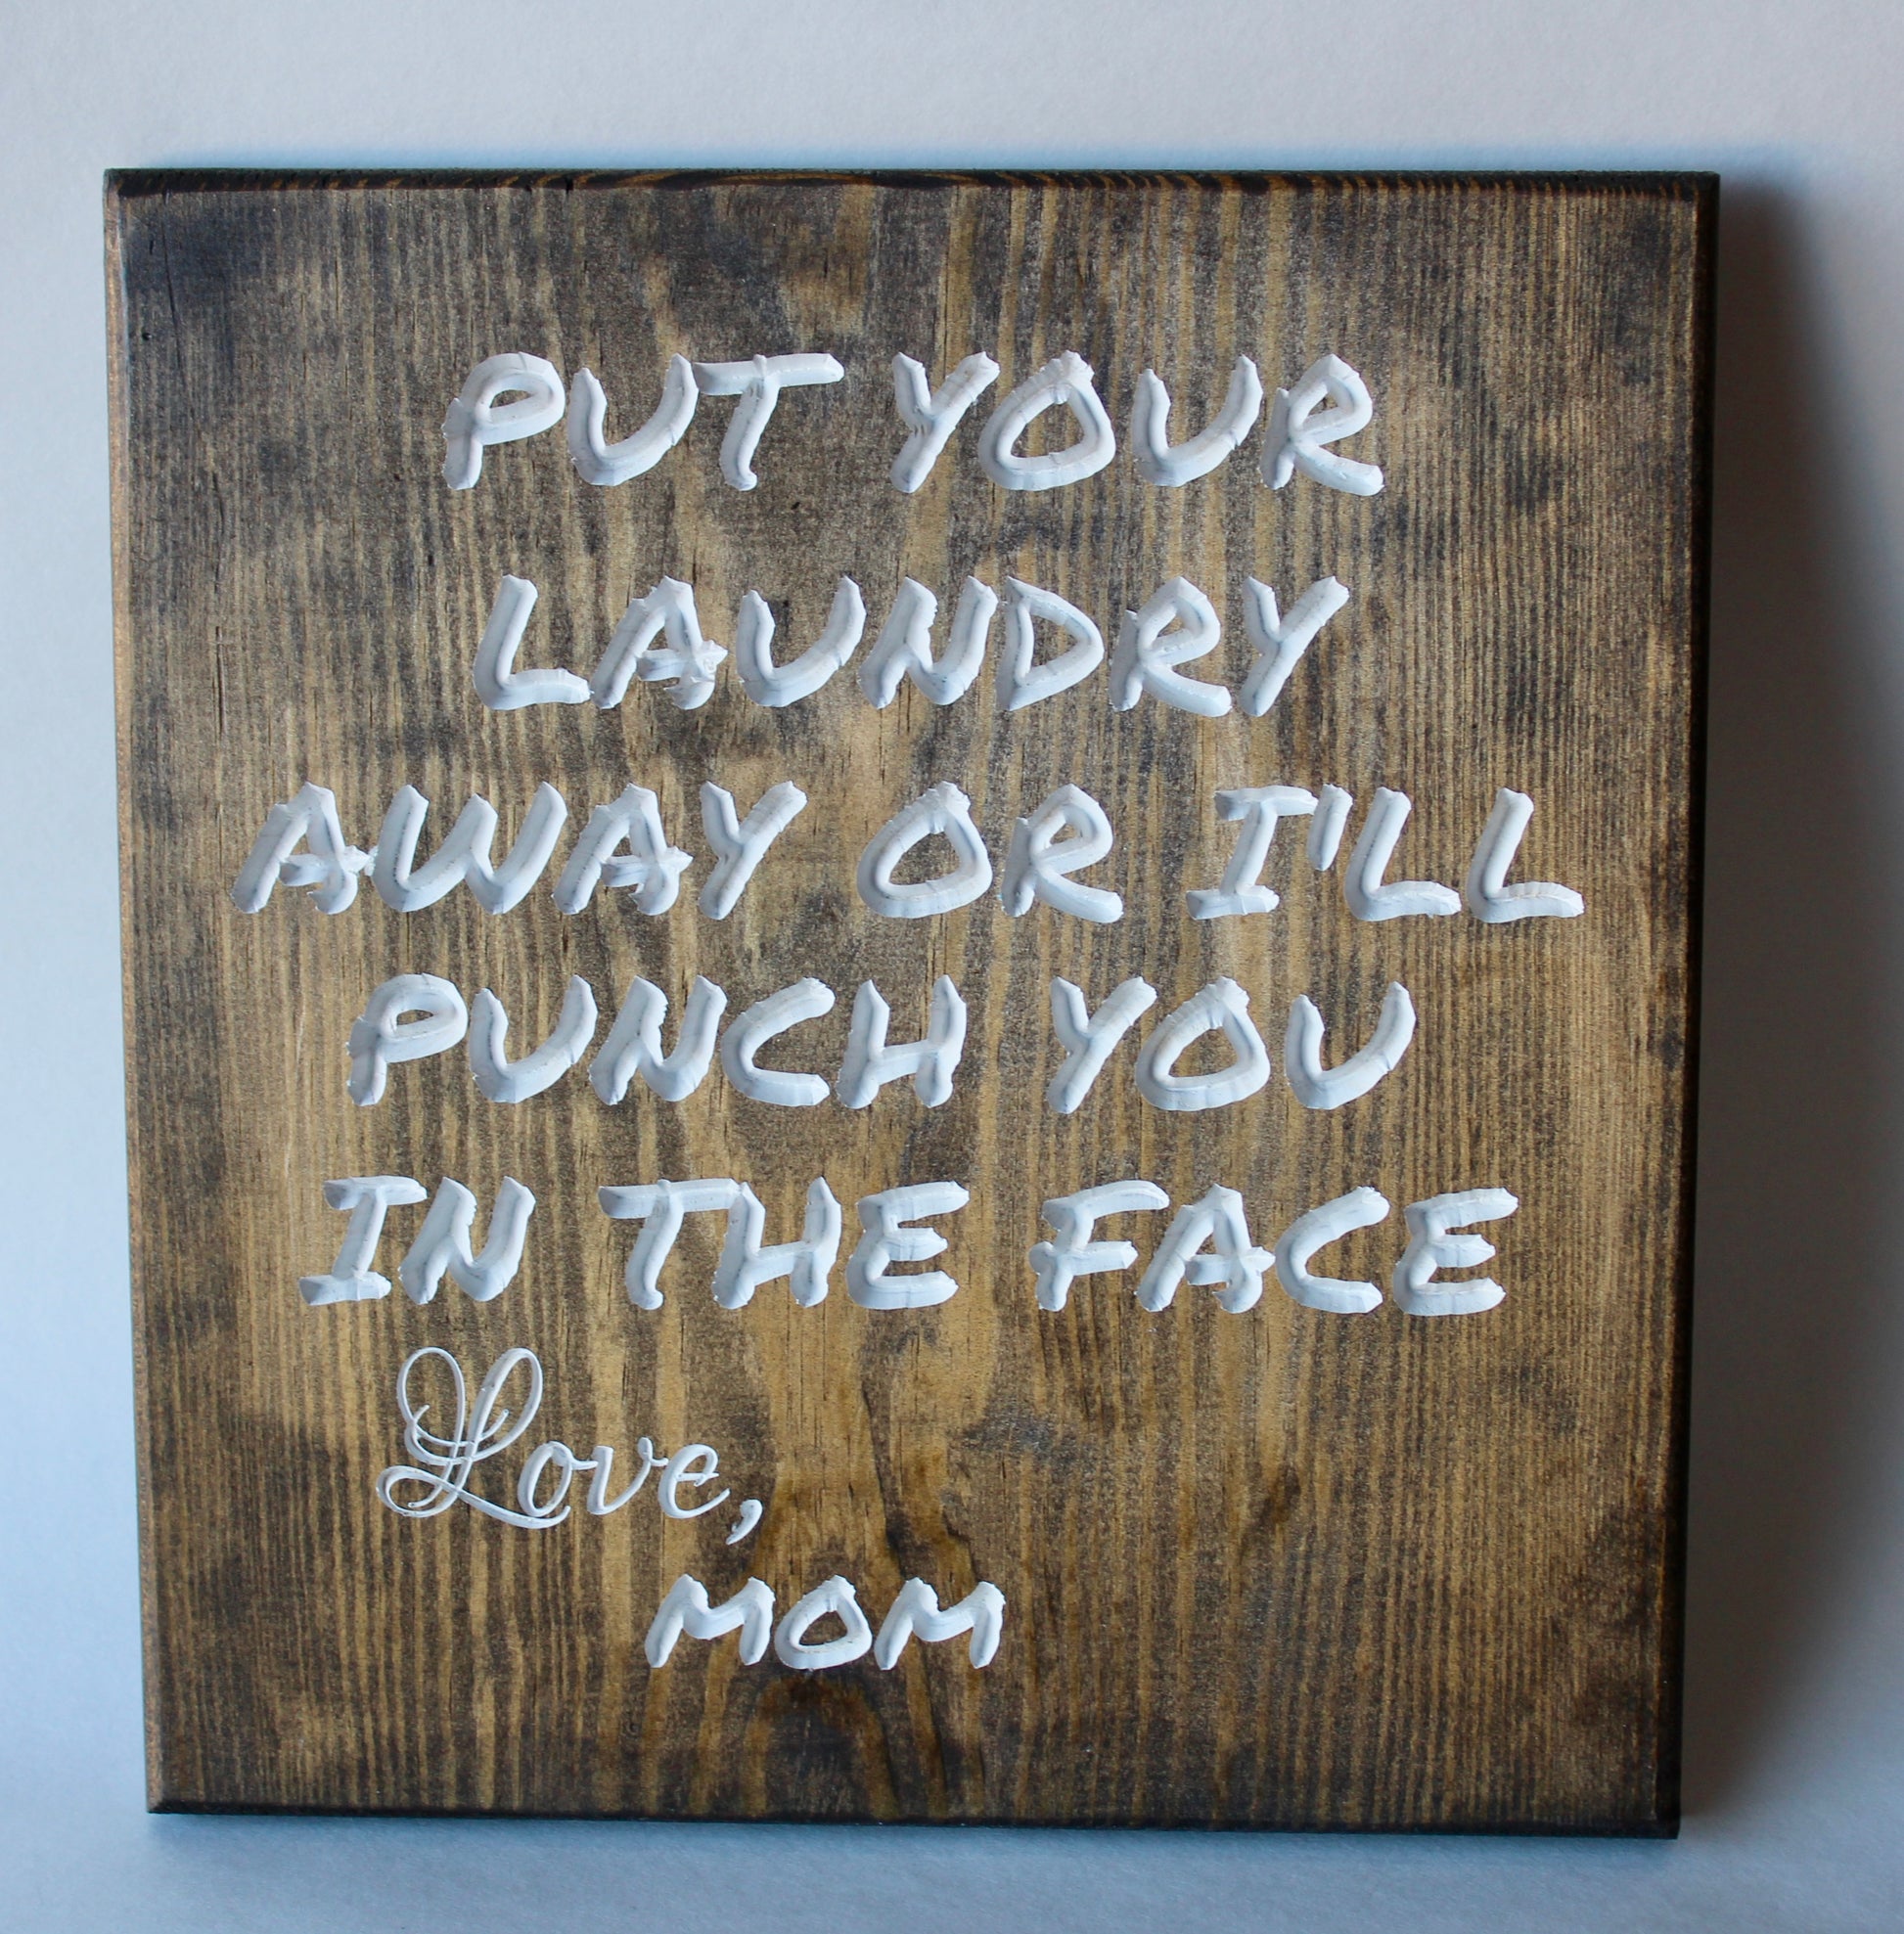 put your laundry away or I'll punch you in the face love mom